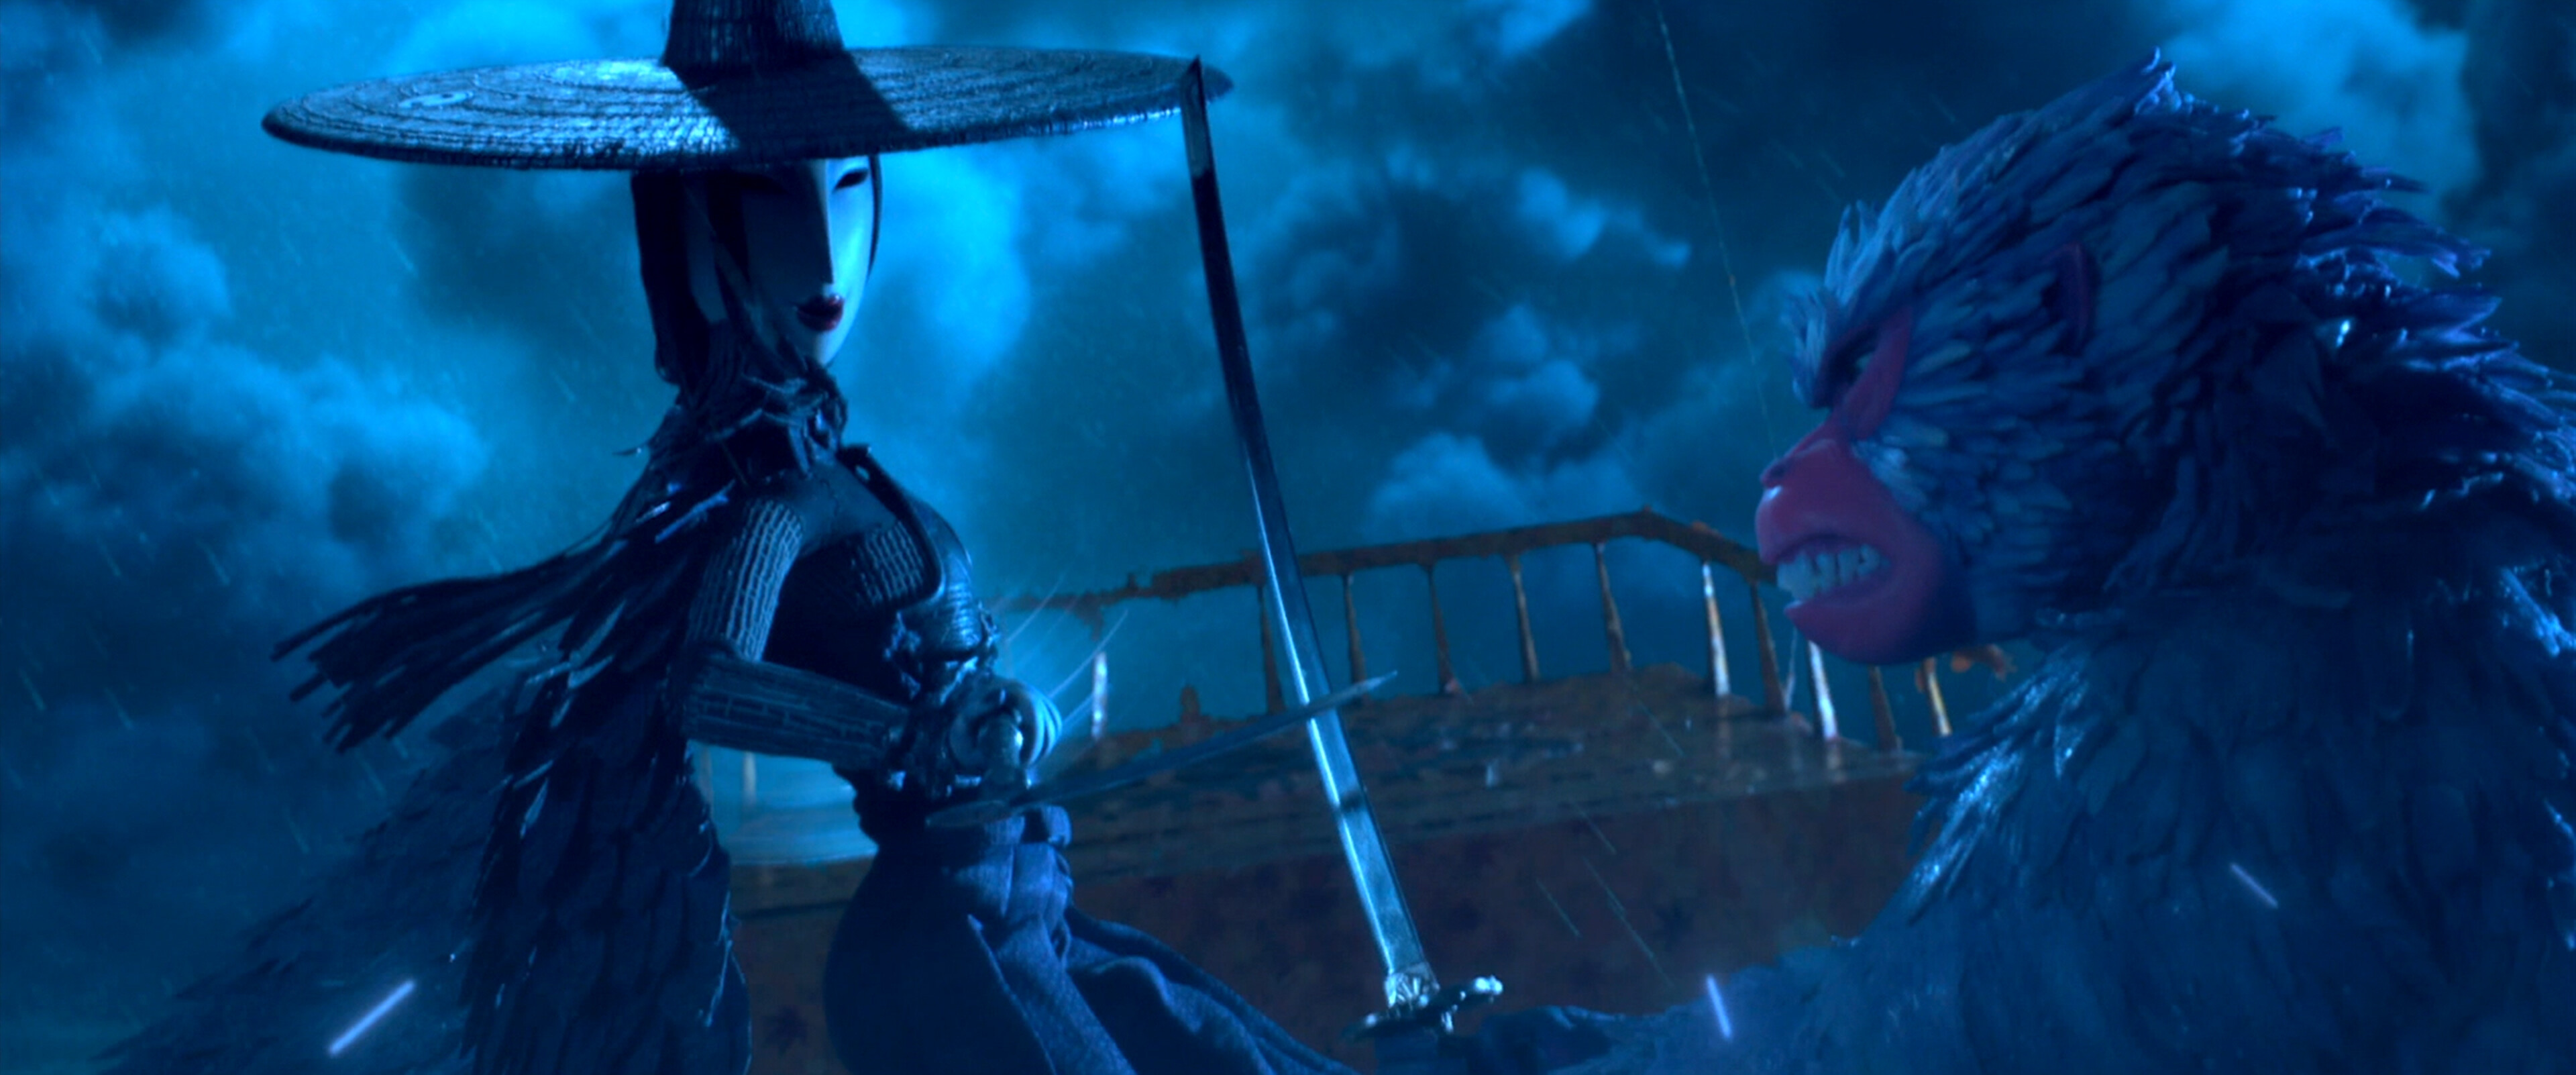 Kubo and the Two Strings: Animated film, Directed by Travis Knight. 3840x1610 Dual Screen Wallpaper.